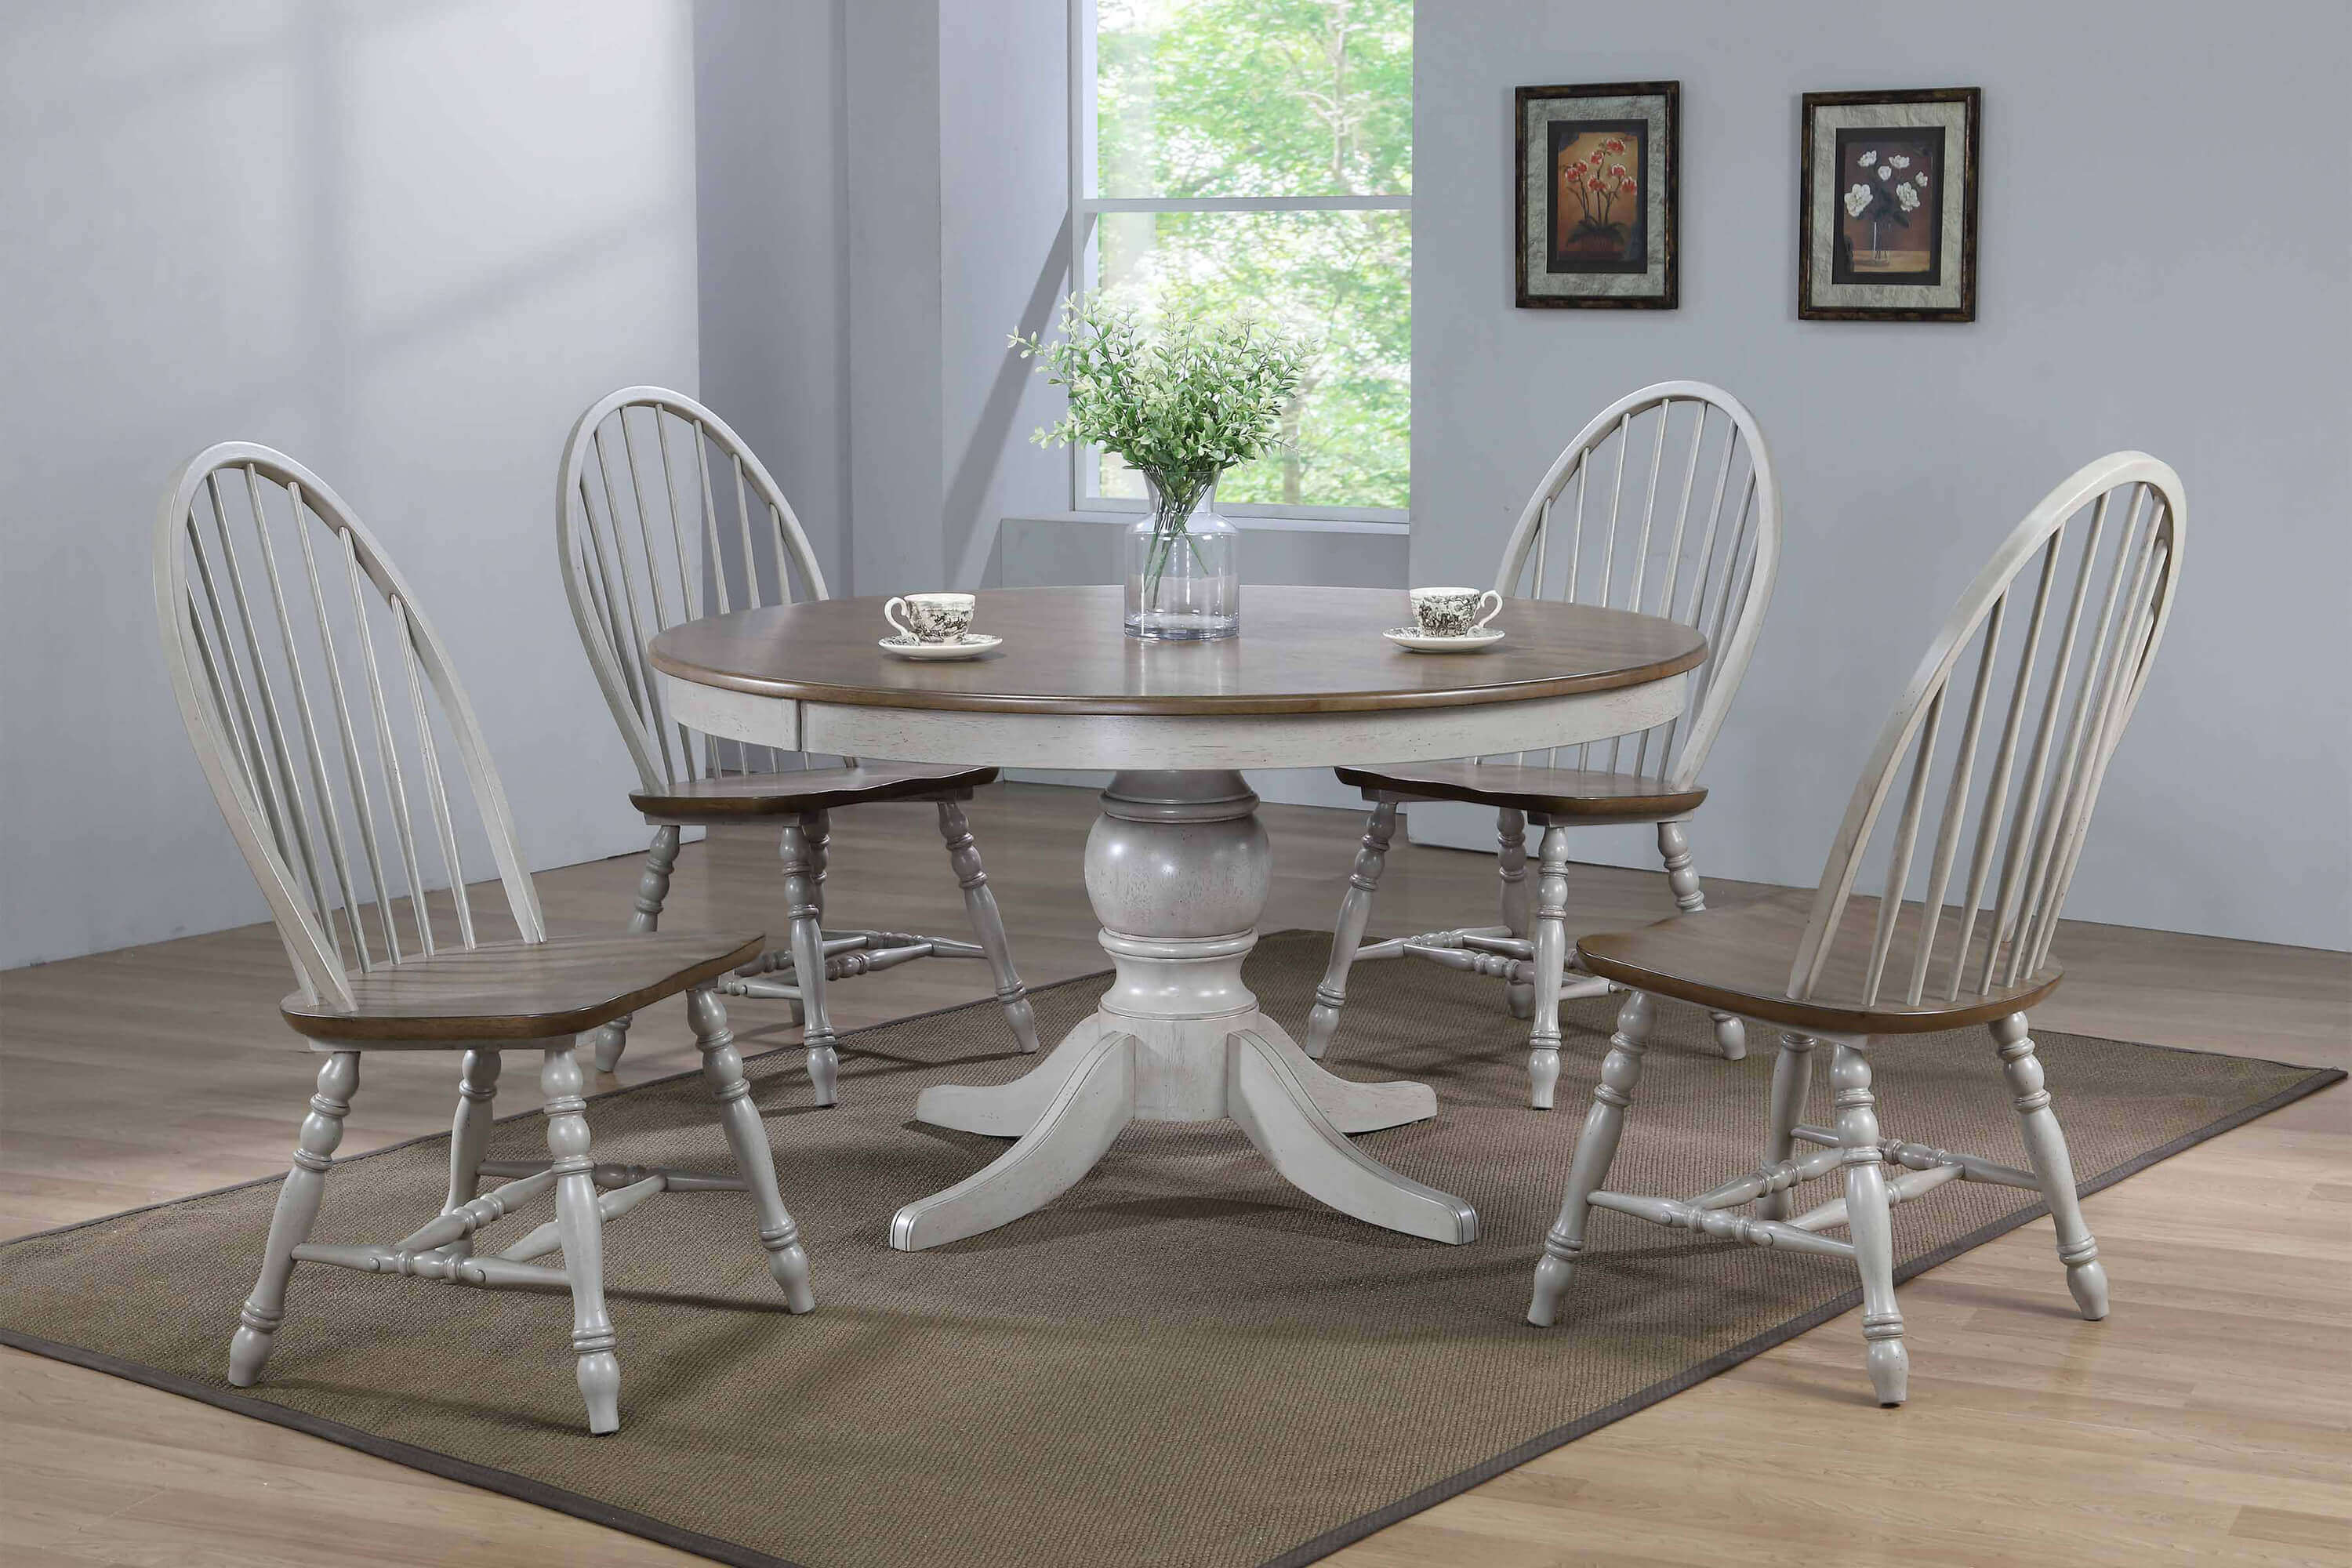 Jack Round Pedastal Dining Table Set, Round Pedestal Kitchen Table And Chairs